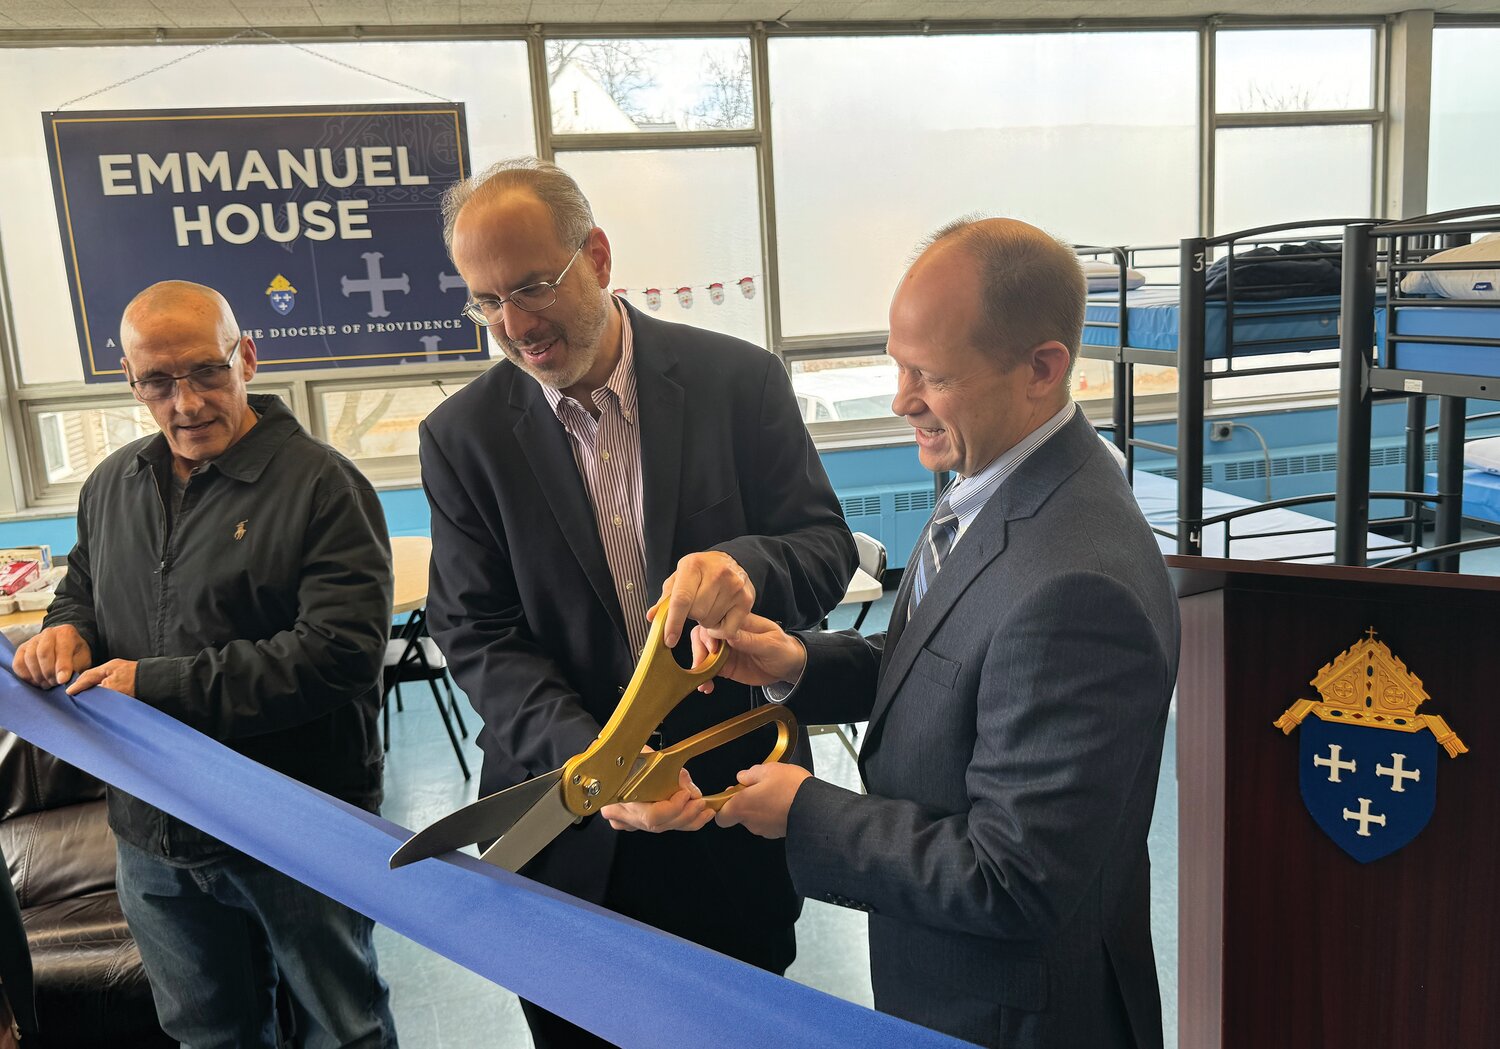 State Housing Secretary Stefan Pryor, center, assists Jim Jahnz, secretary of Catholic Charities and Social Ministries, in cutting the ribbon marking the official opening of the new women’s shelter Emmanuel House, as Shelter Manager Mike Marzullo looks on.